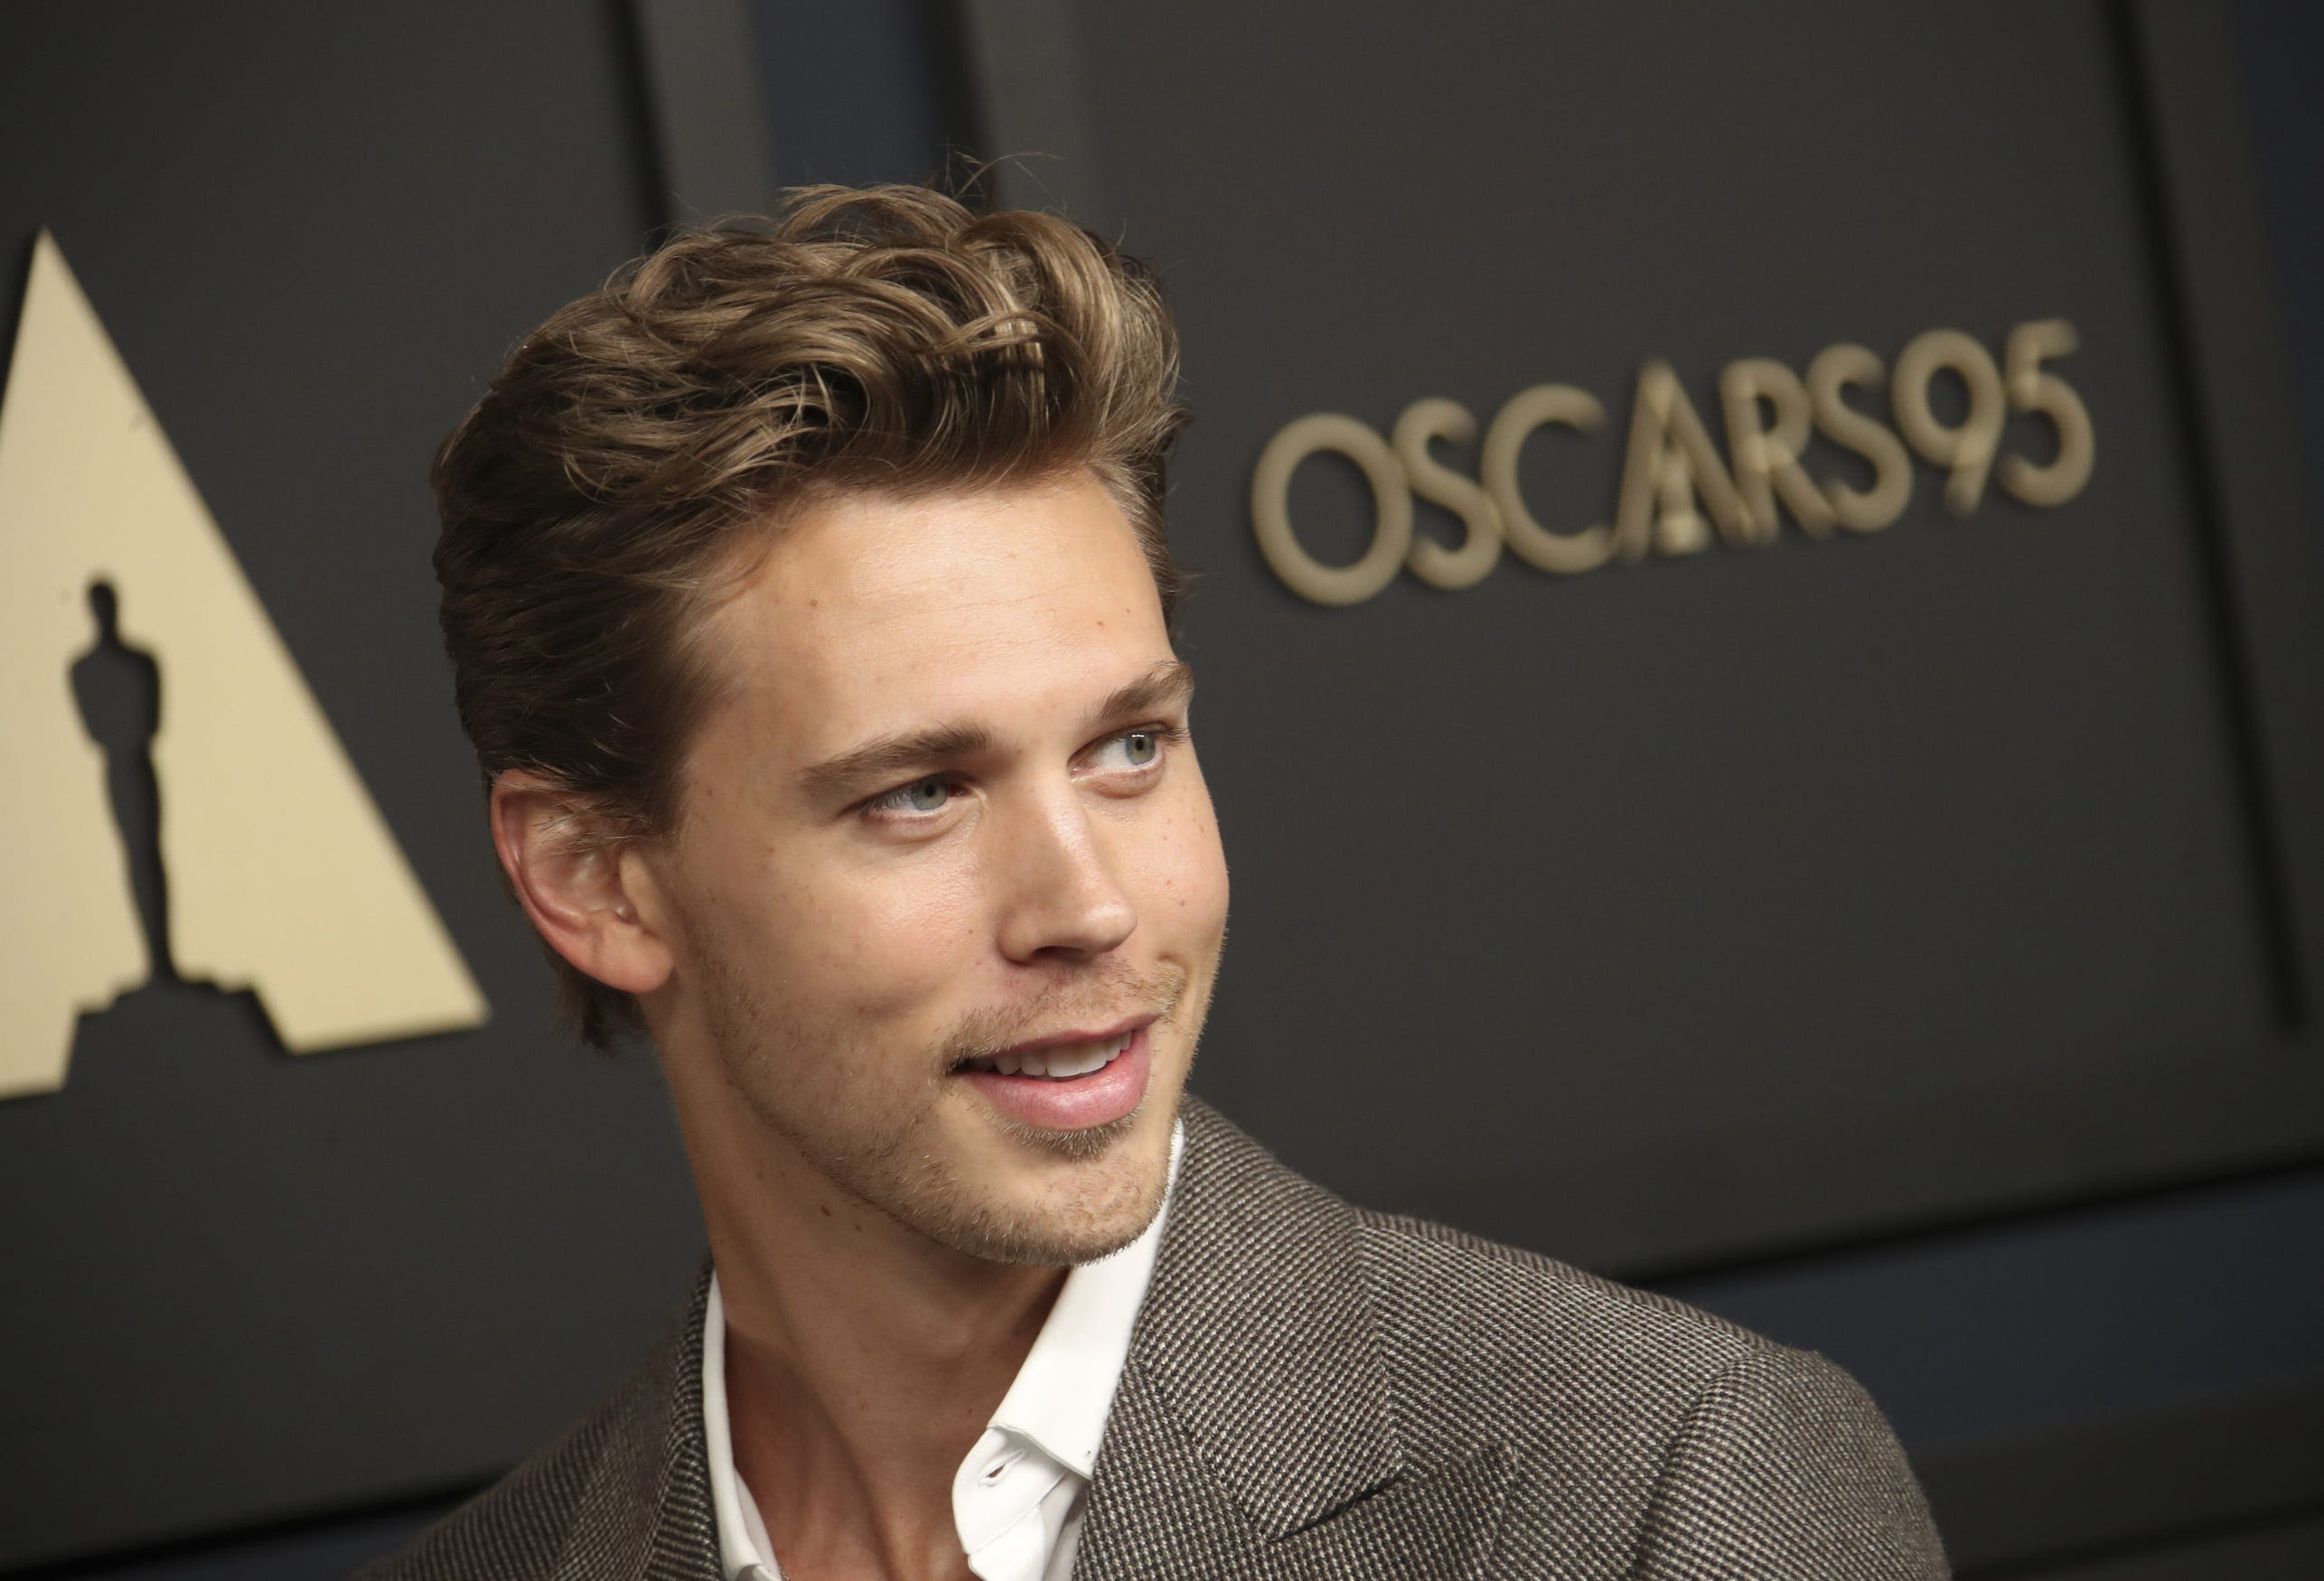 Meet the actors waving the green flag at the Indy 500: Austin Butler and Jodie Comer